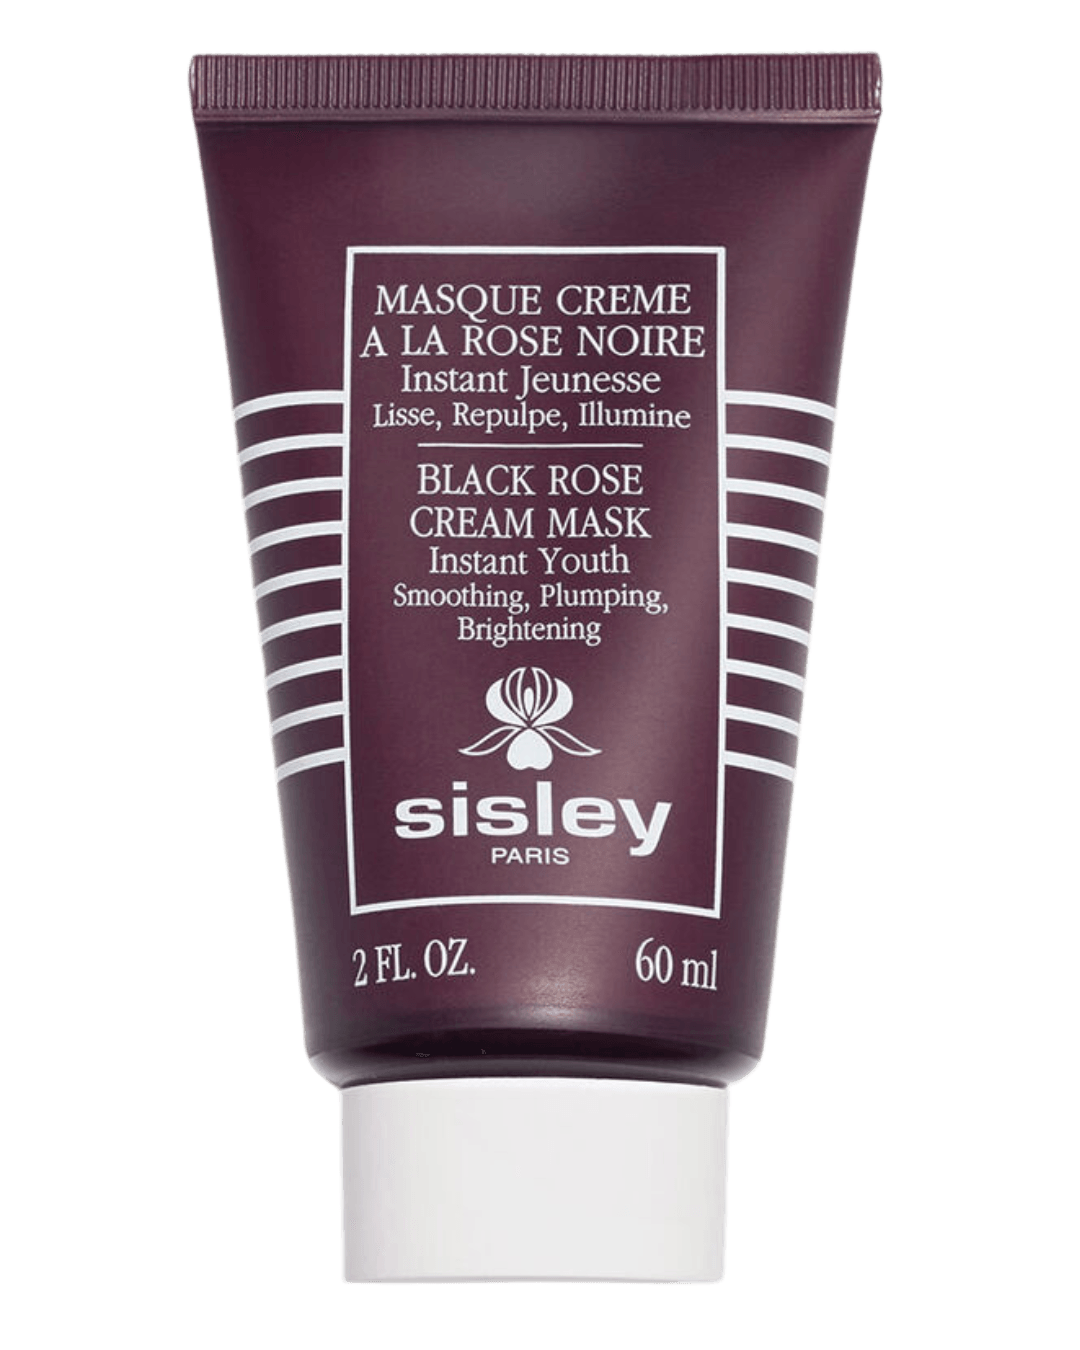 Daily Vanity Beauty Awards 2024 Best Skincare Sisley Paris Black Rose Cream Mask Voted By Beauty Experts